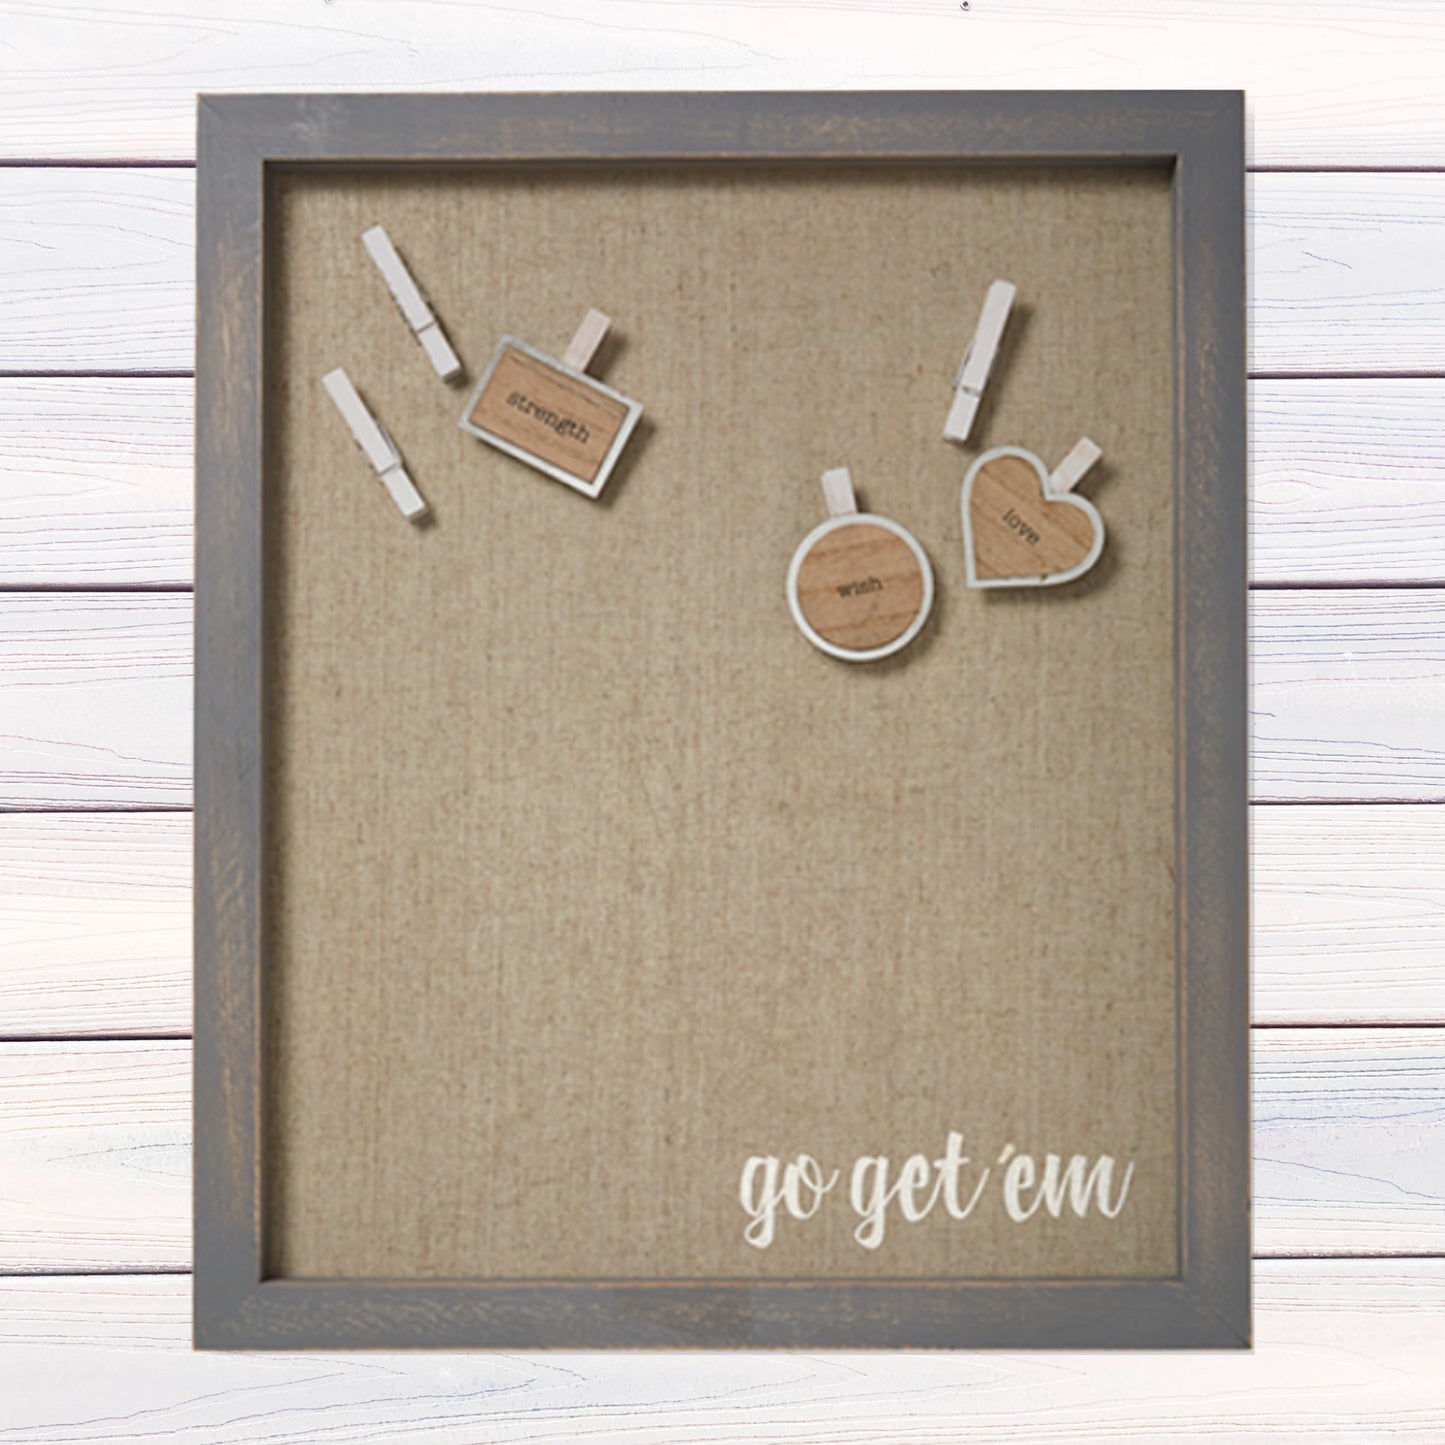 Go Get 'Em Home Office Magnetic Board - Fabric Framed Functional Wall Art (15x18) shown on whitewashed shiplap wall | oak7west.com